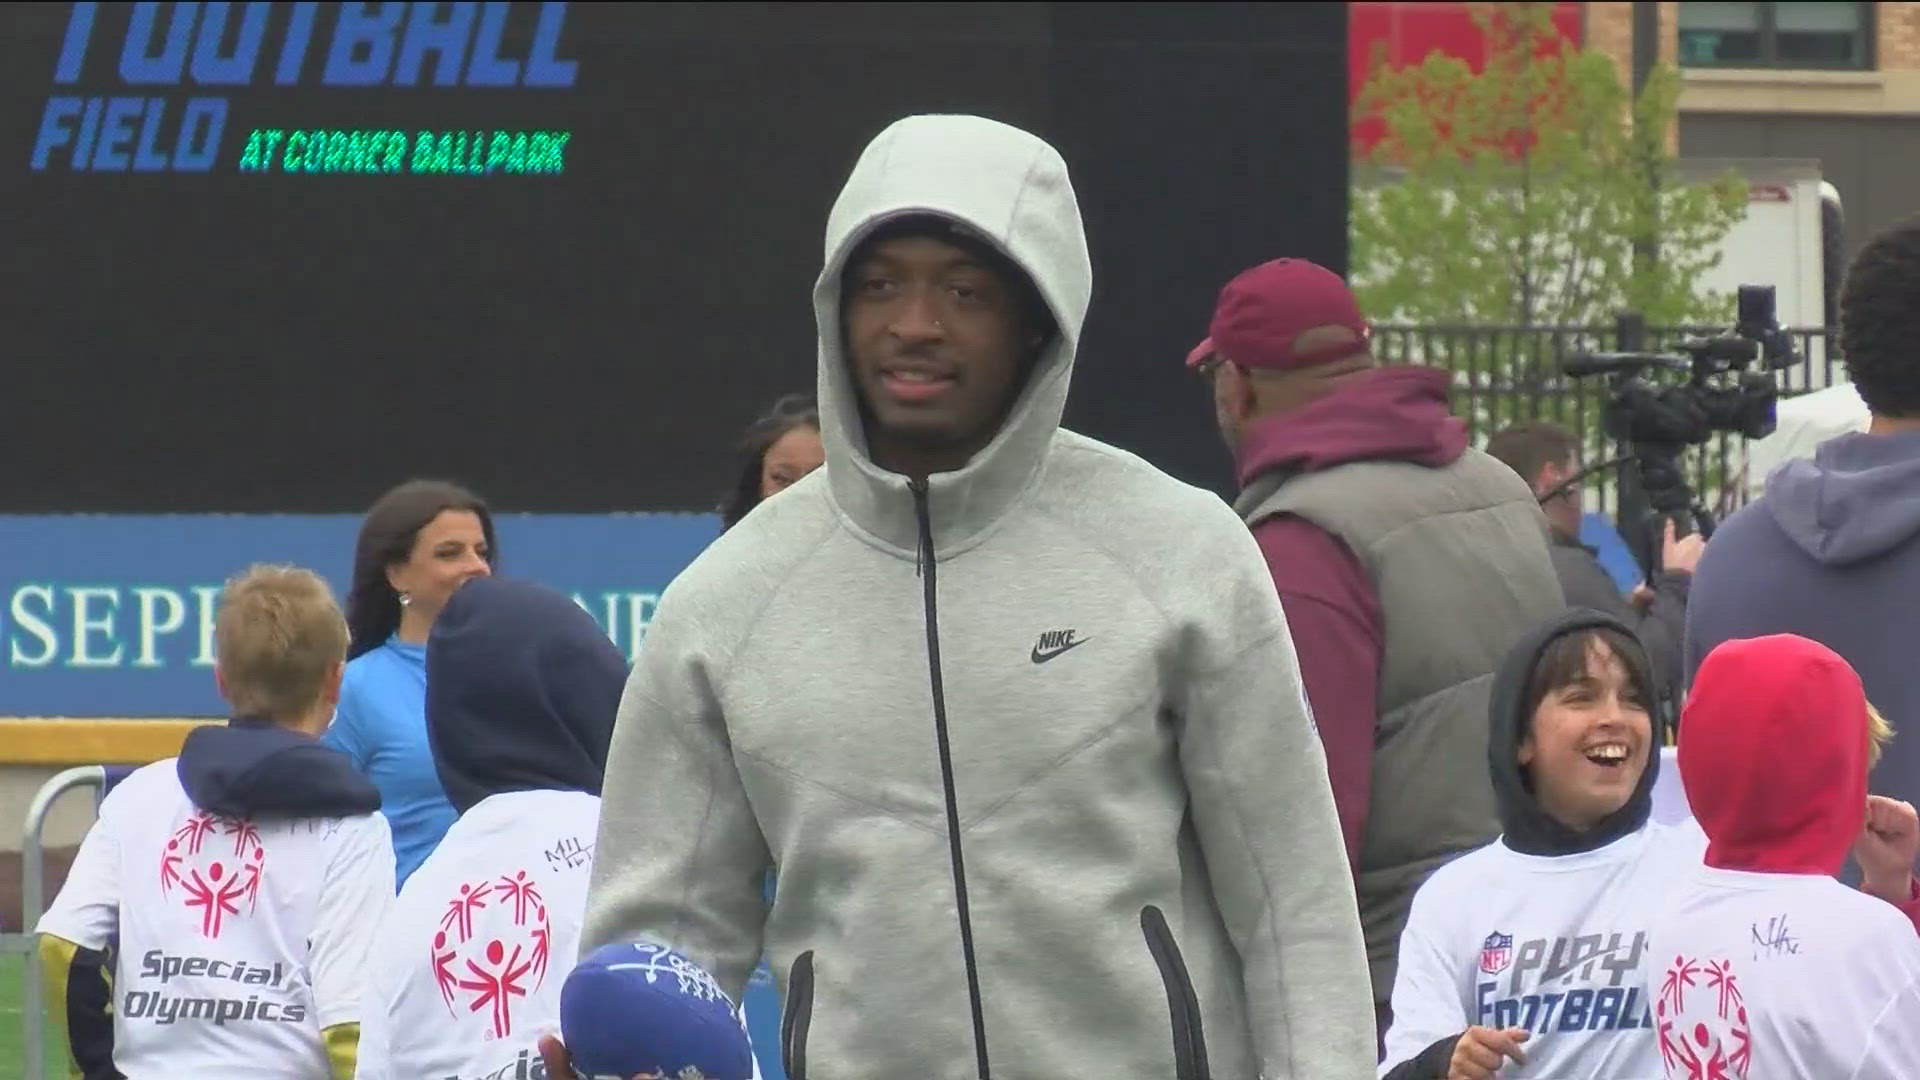 Former Toledo cornerback Quinyon Mitchell joined NFL prospects for a football clinic with Special Olympics athletes in Detroit on Wednesday.